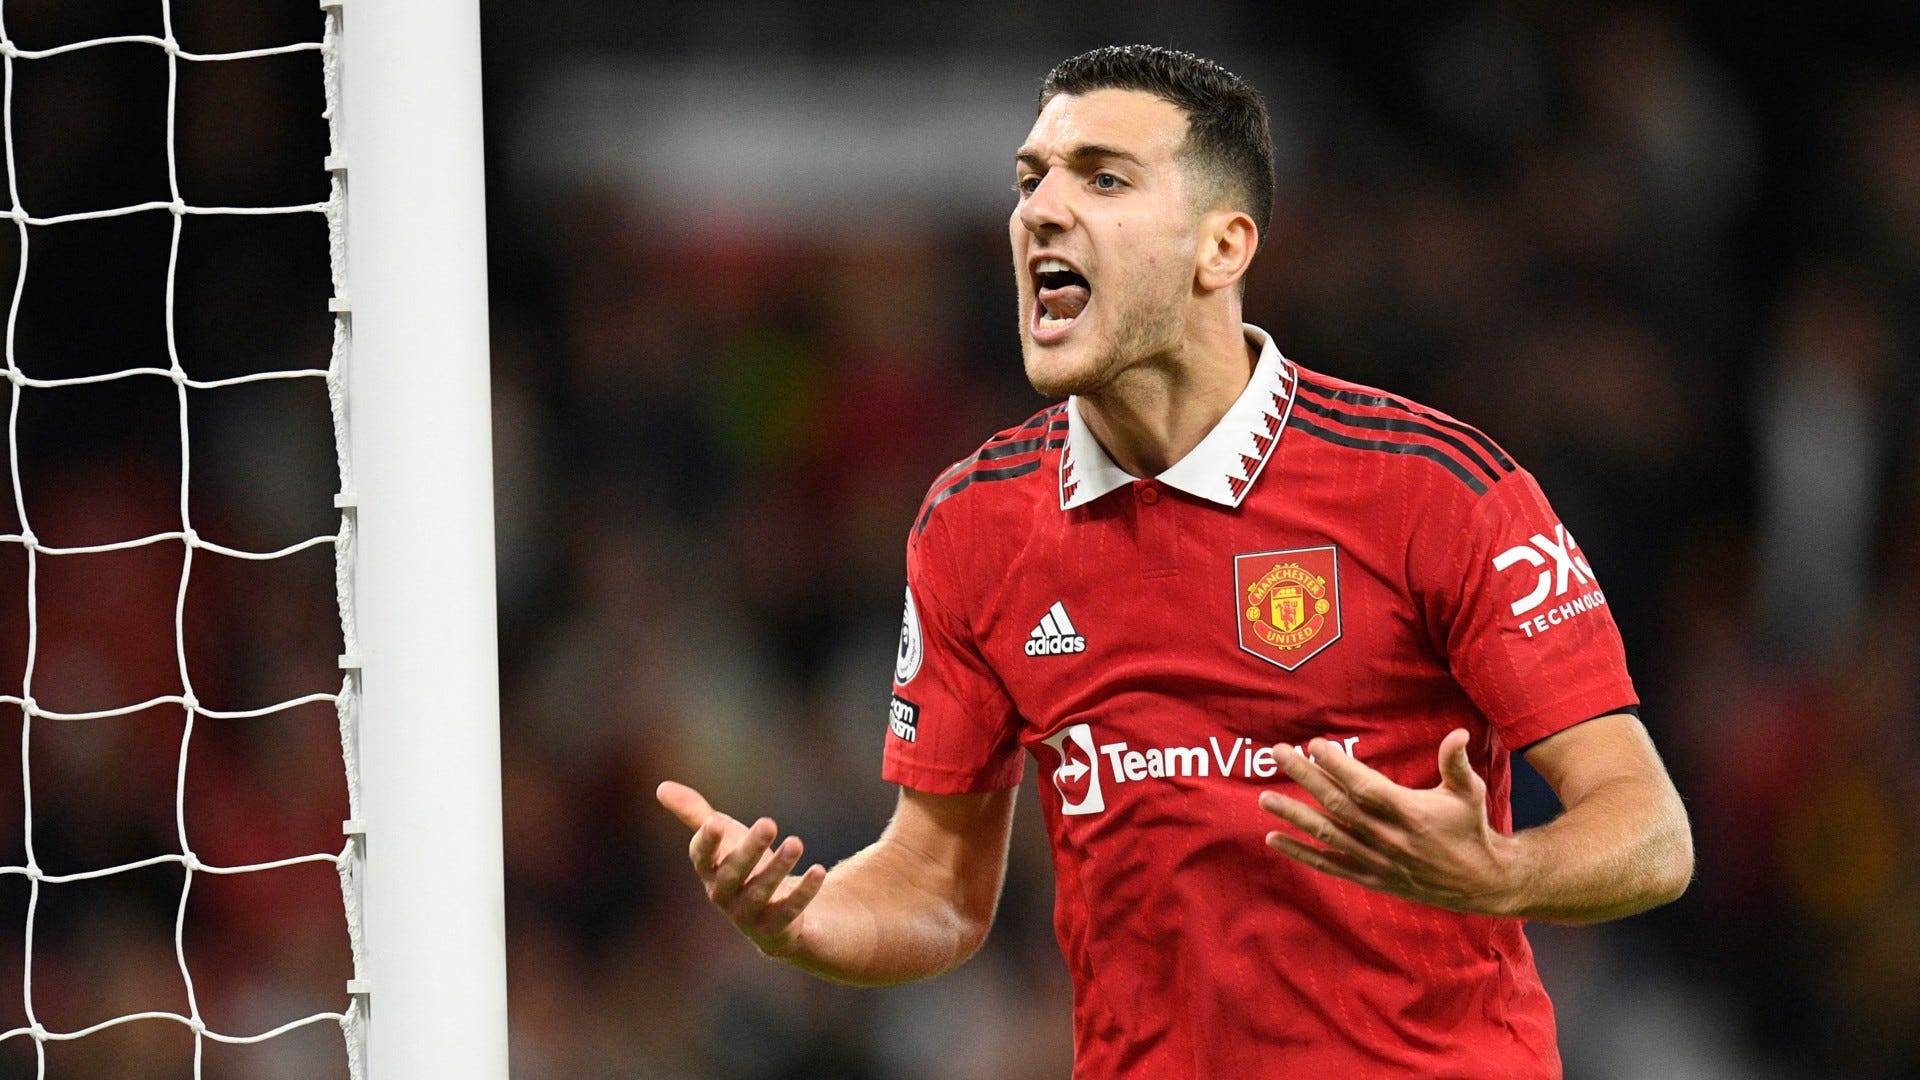 Defiant Dalot insists Man Utd won't change mentality despite making  mistakes in disappointing Aston Villa defeat | Goal.com